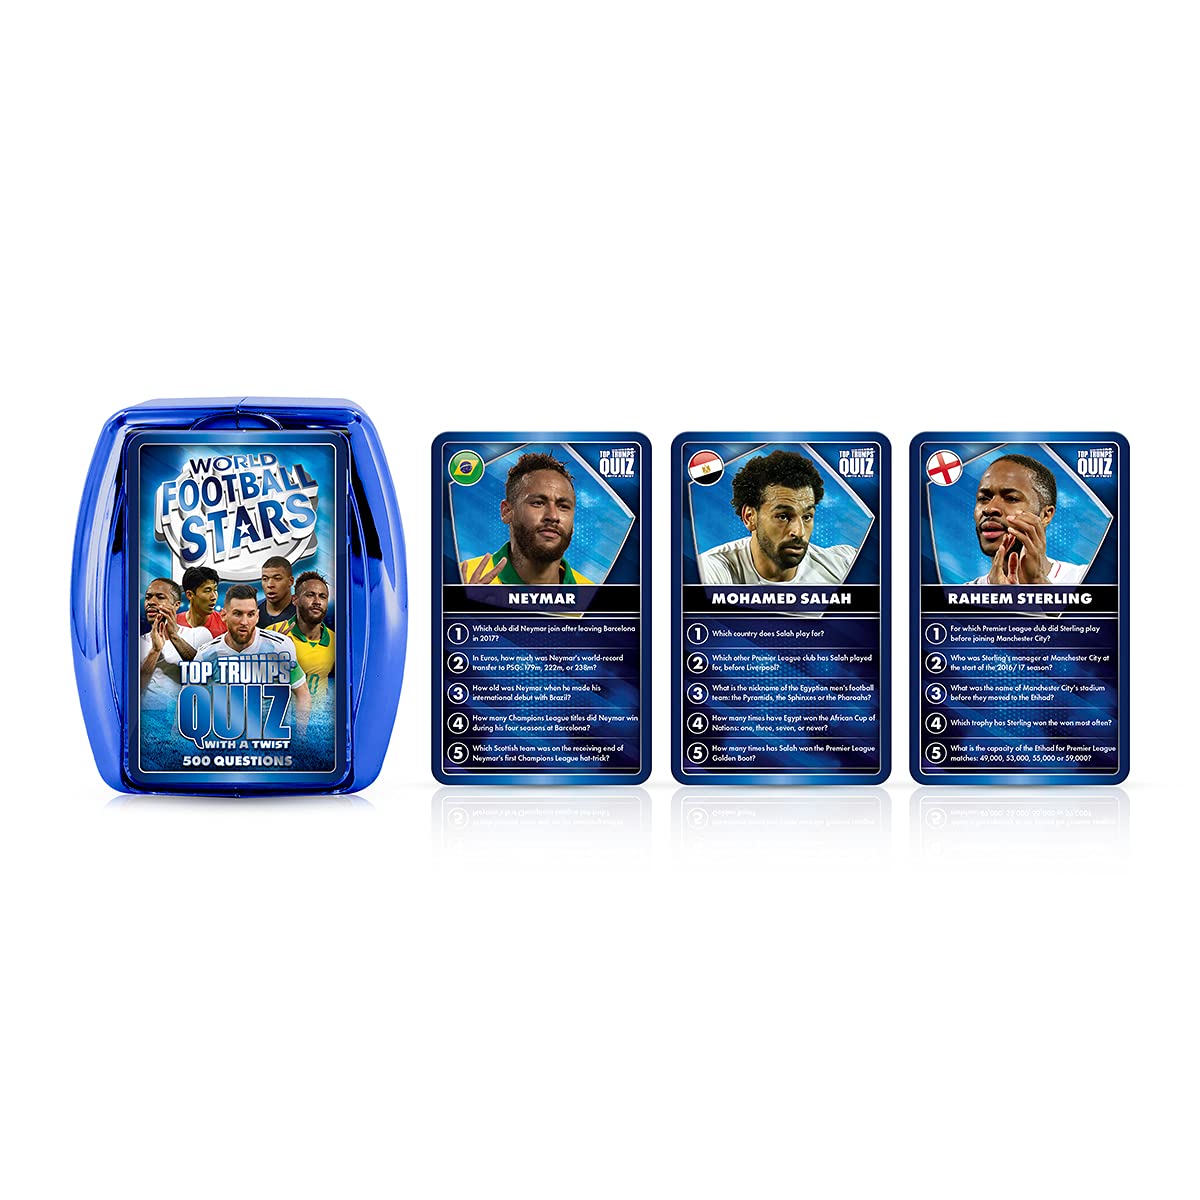 Top Trumps World Football Stars Quiz Game; Entertaining Trivia Exploring Your Favorite Football/Soccer Stars from Past and Present |Family Fun for Ages 6 & up